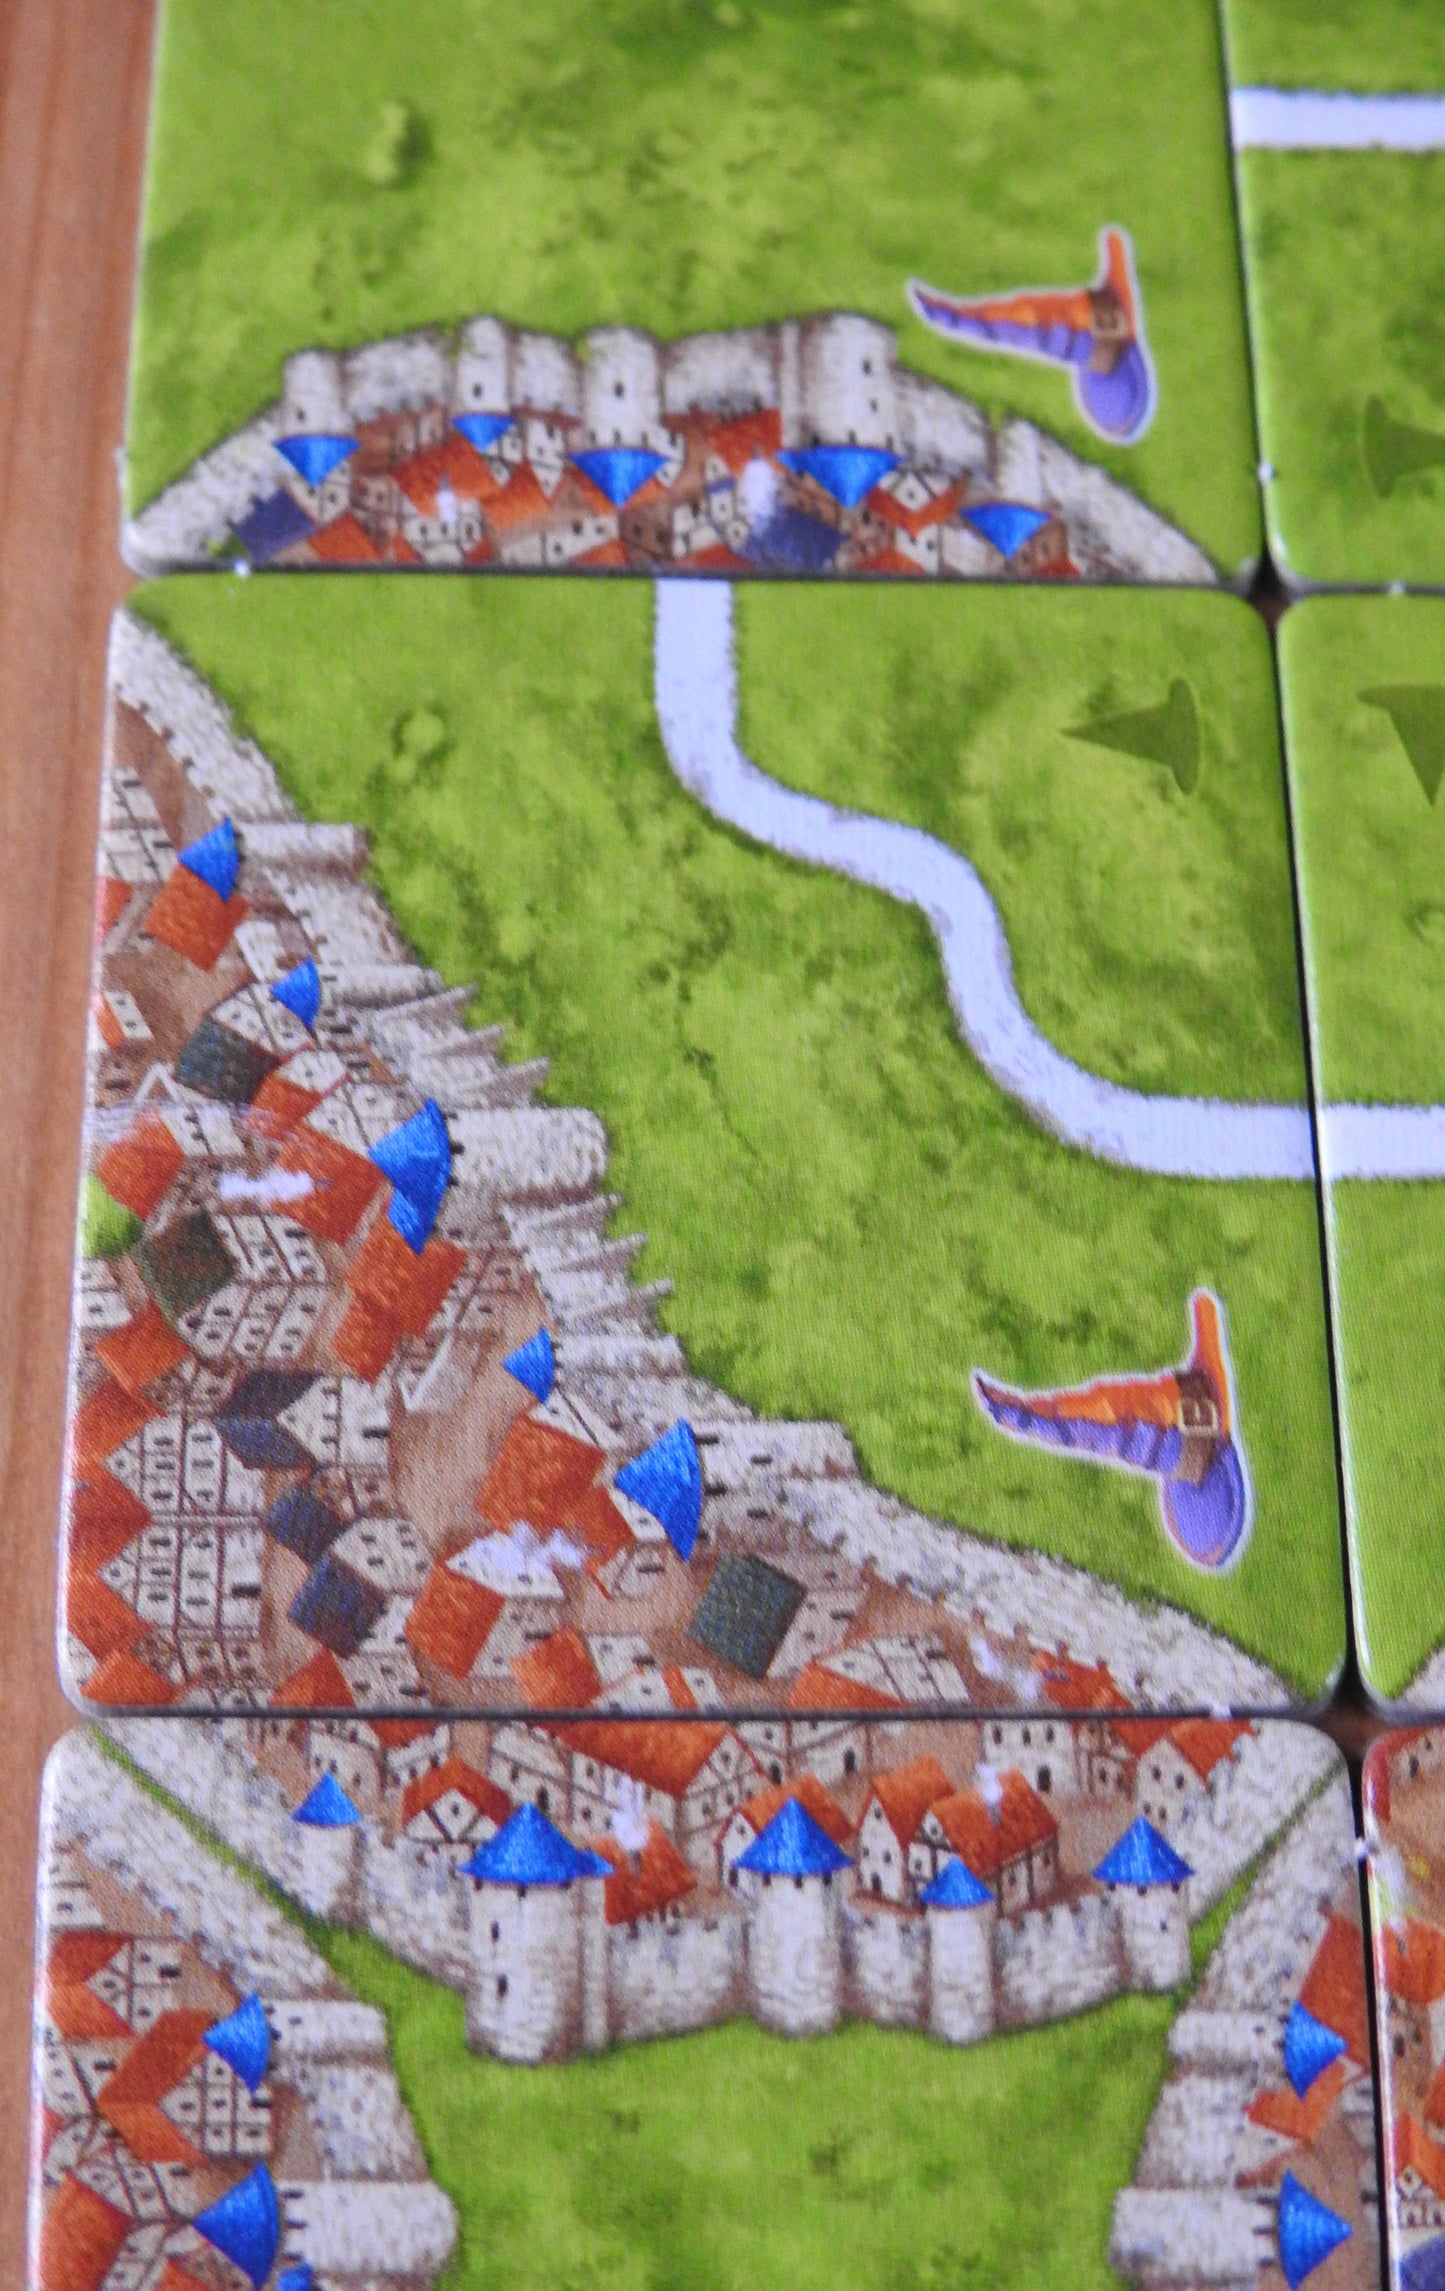 A last close-up view of some of the included landscape tiles in this Carcassonne Mage & Witch expansion.